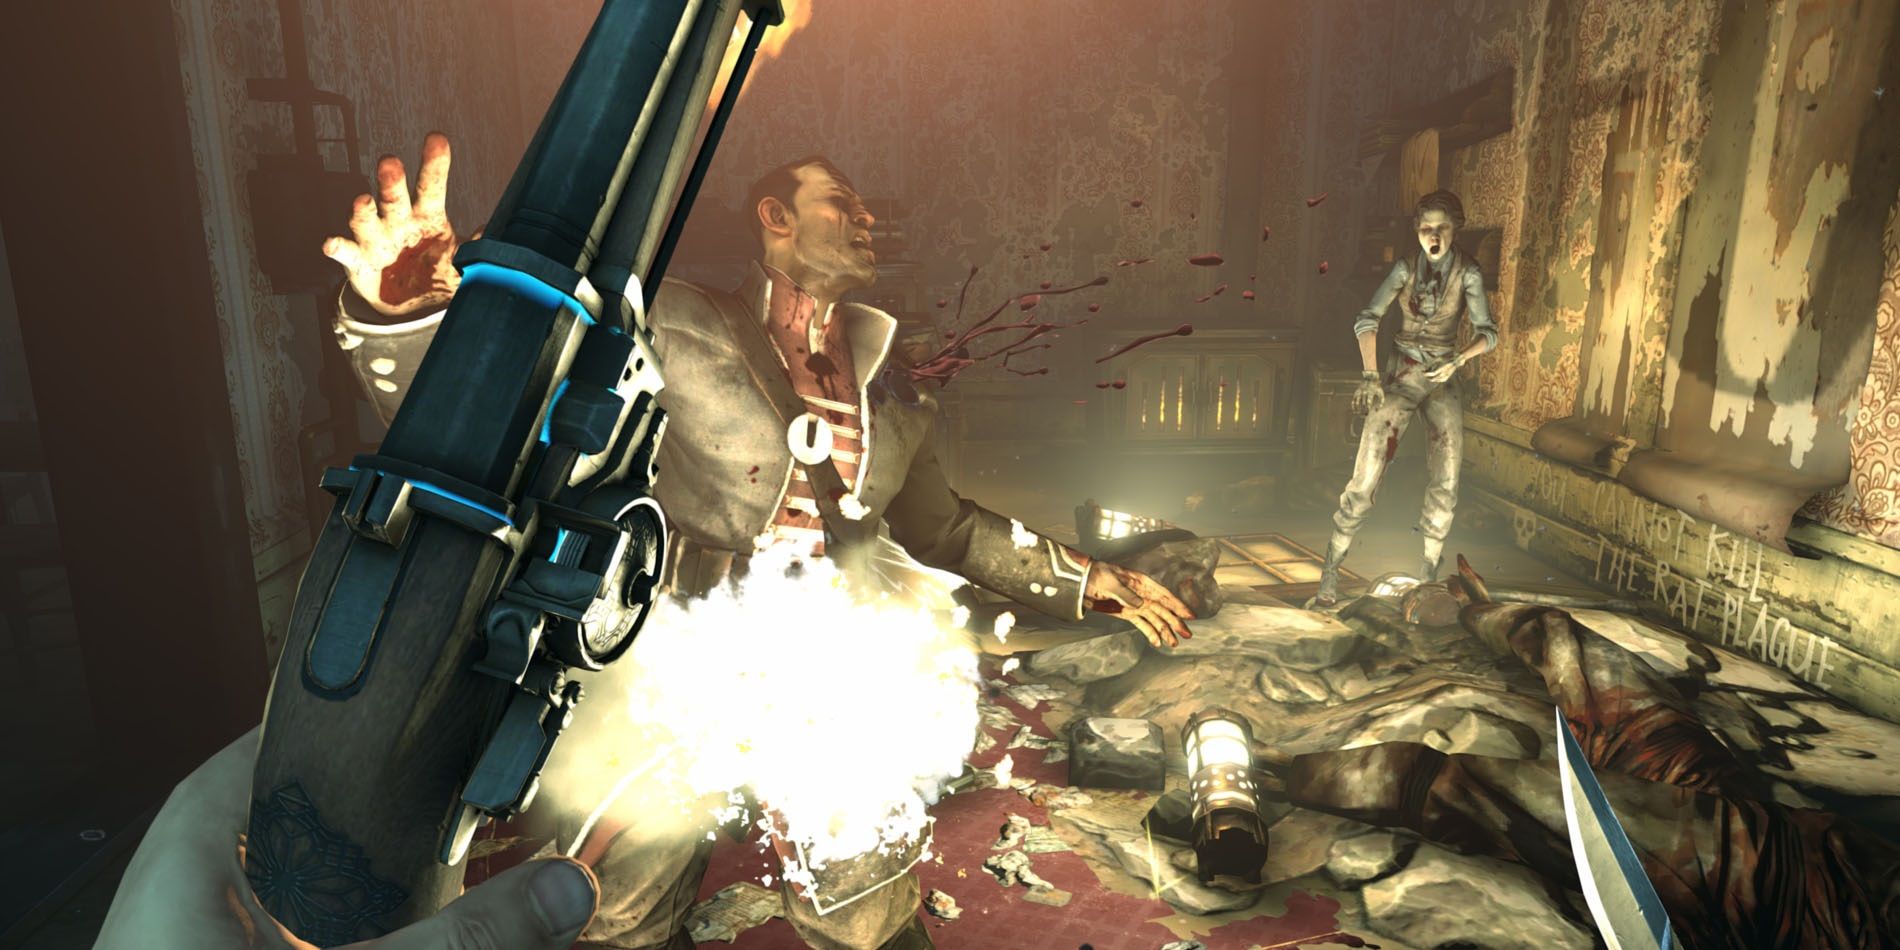 Dishonored, shooting guards and weepers